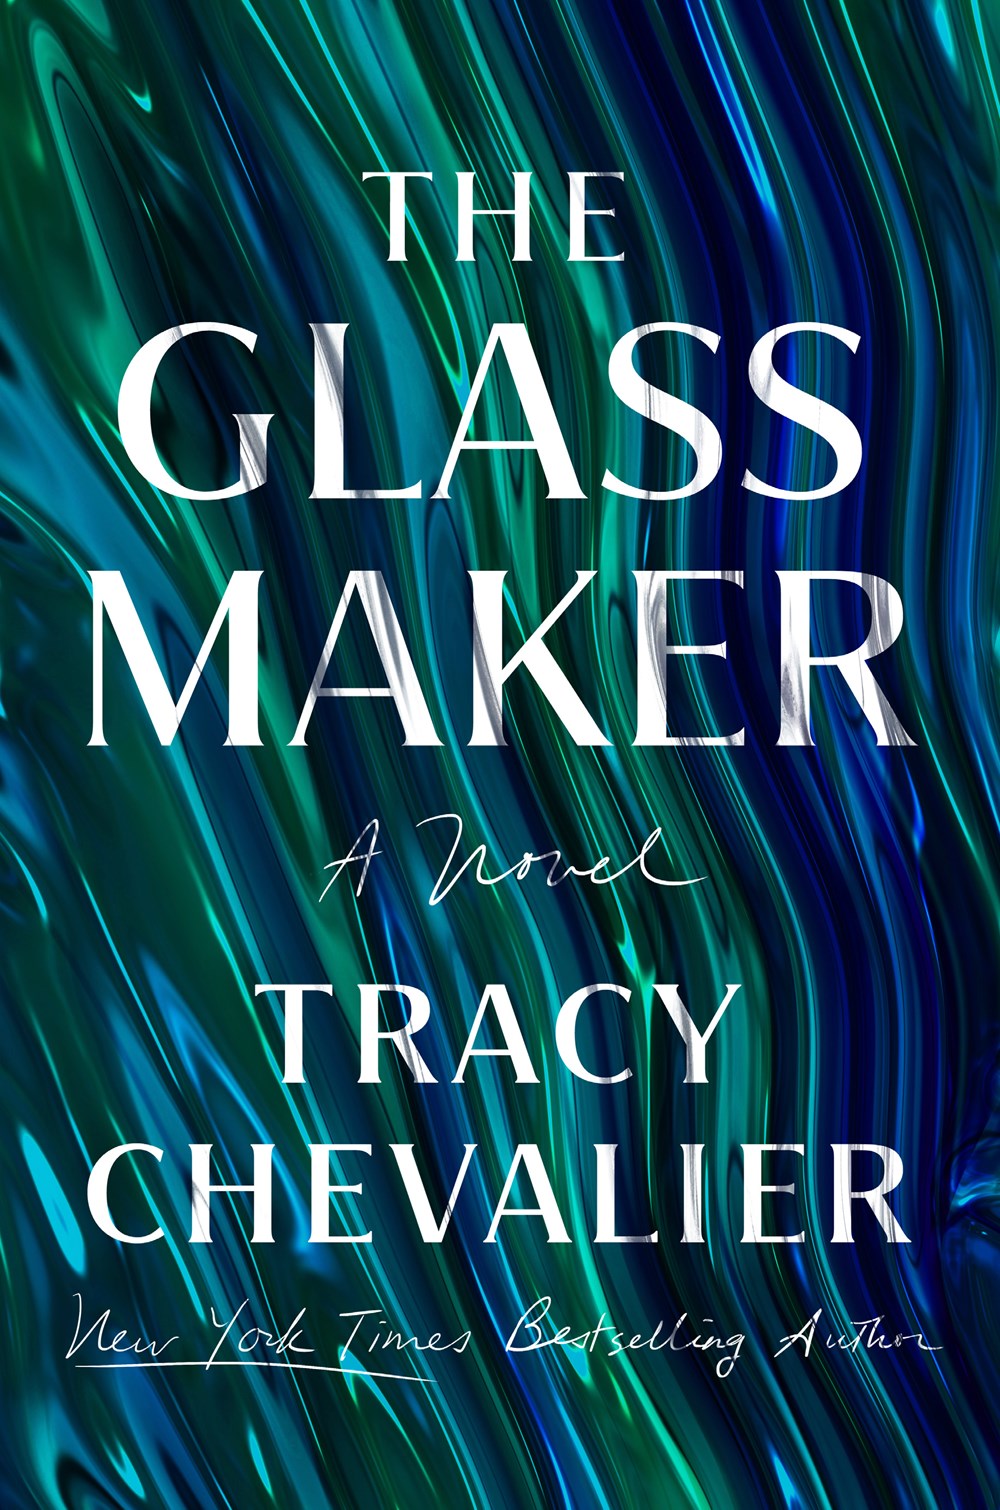 The Glass Maker: A Novel by Tracy Chevalier (6/18/24)